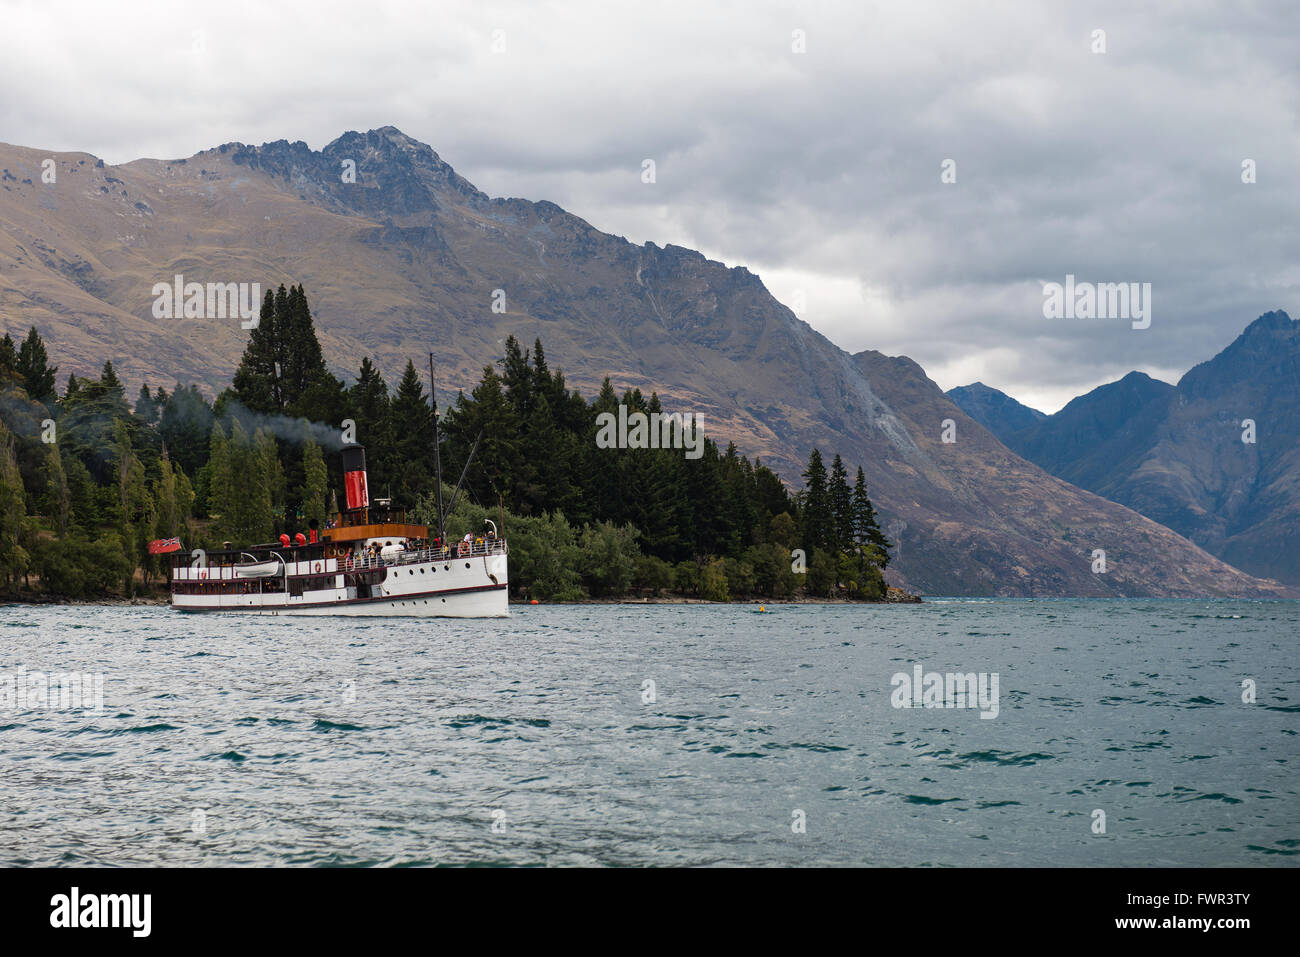 QUEENSTOWN, NZ - JAN 7 2016: TSS Earnslaw is the last commercial passenger coal-fired steamship in the southern hemisphere. Stock Photo